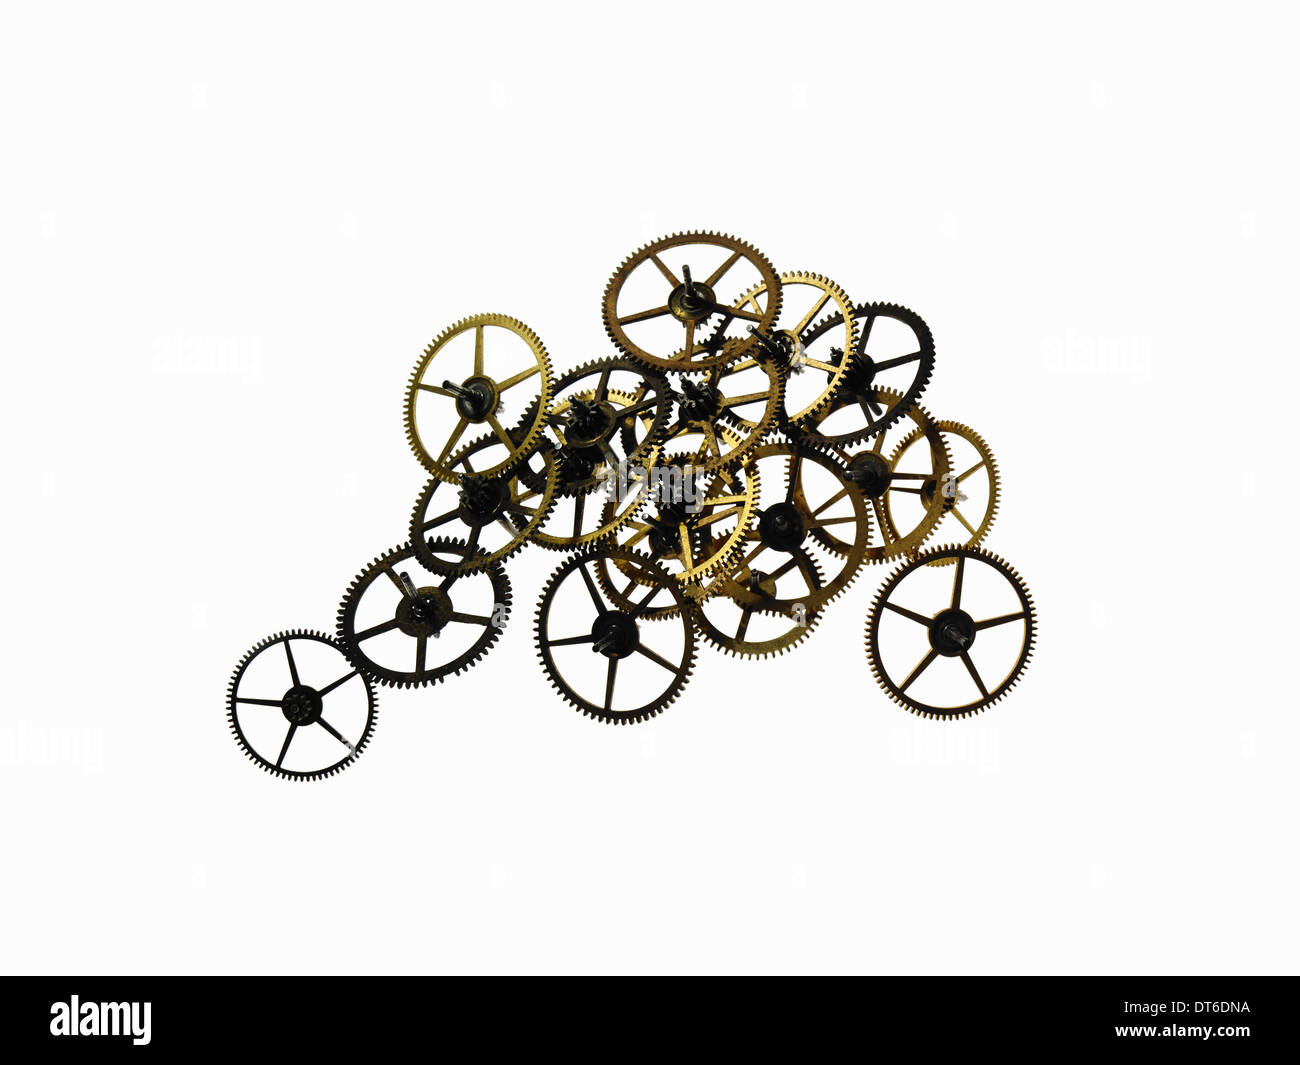 Watch gears, small precision made cog wheels with spokes and fine teeth or notches around the edge. Arranged in a pile. Stock Photo